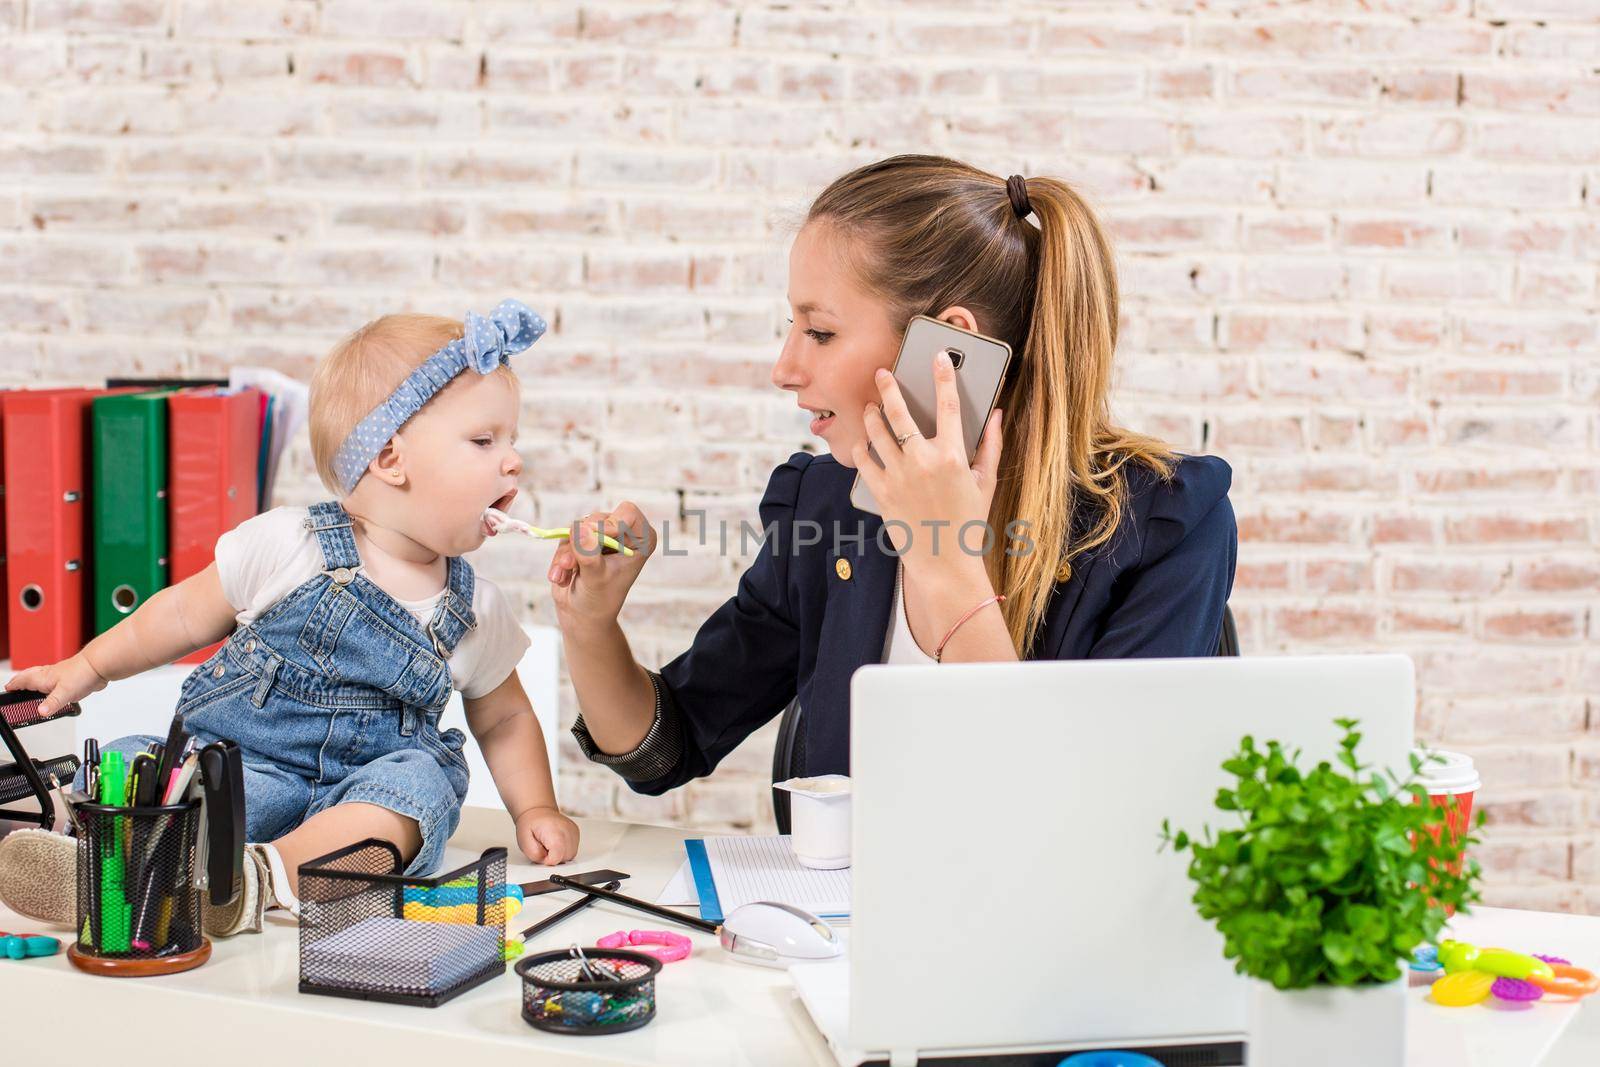 Family Business - telecommute Businesswoman and mother with kid is making a phone call by nazarovsergey